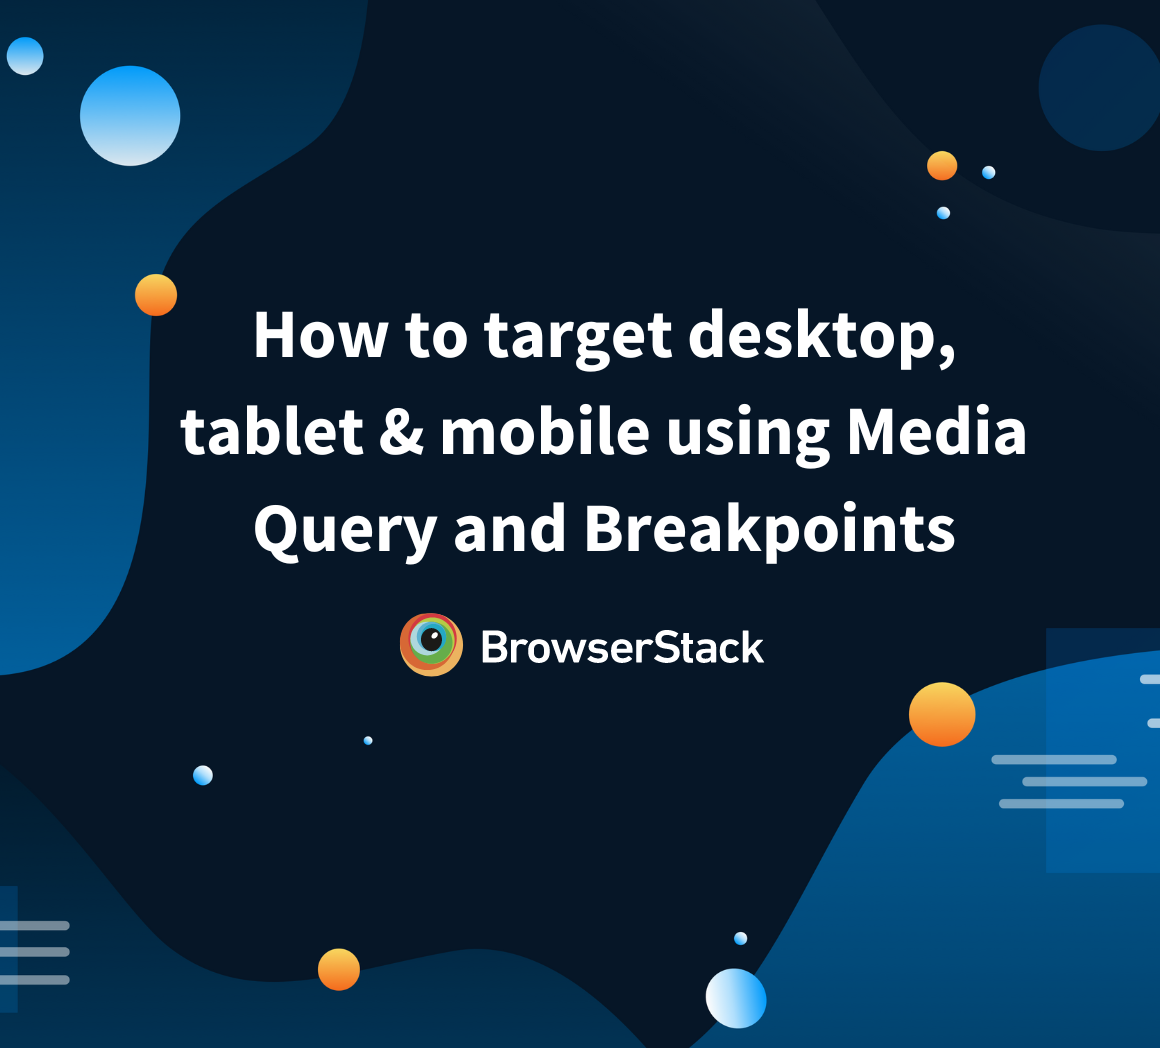 How to target desktop, tablet & mobile using Media Query and Breakpoints